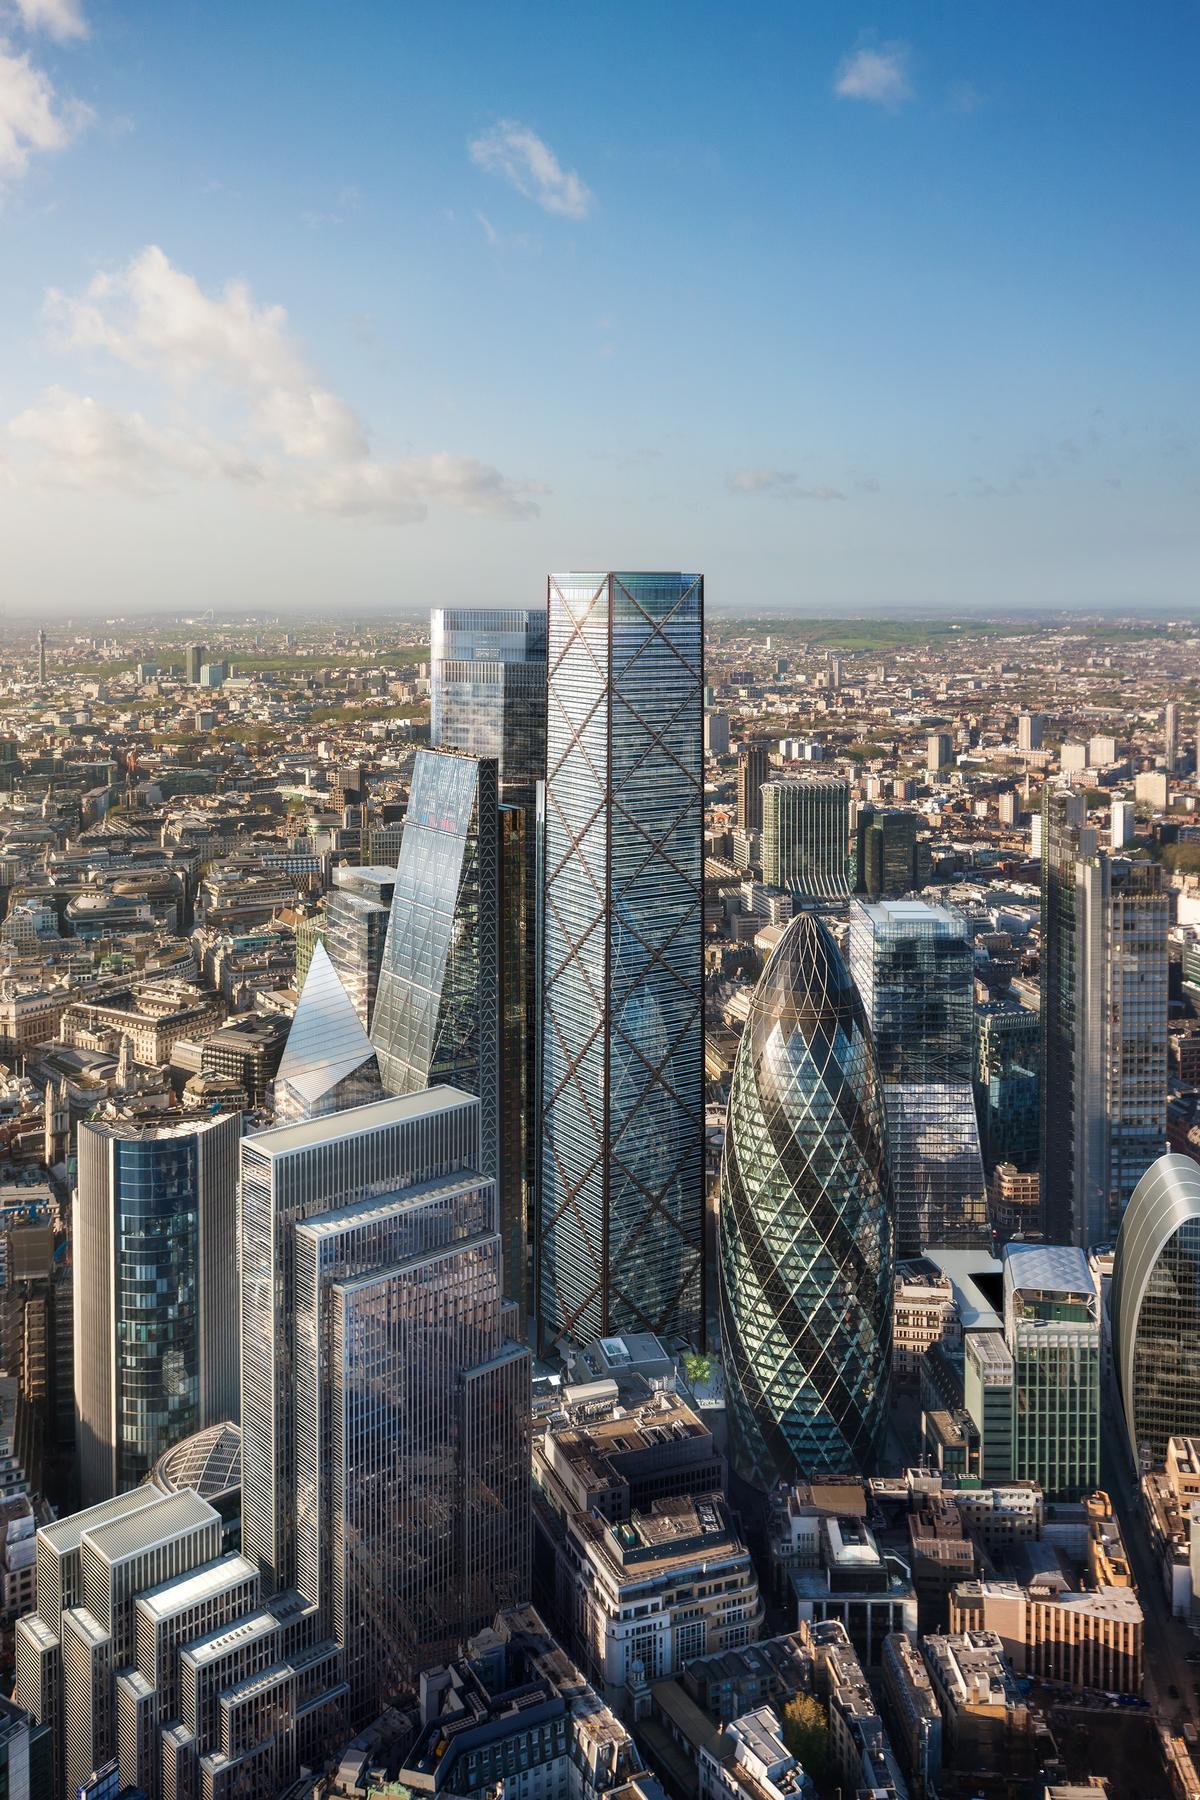 The building will be located in the heart of London’s financial district, between Norman Foster's Gherkin and the Cheesgrater tower by Rogers Stirk Harbour + Partners
/ Eric Parry Architects